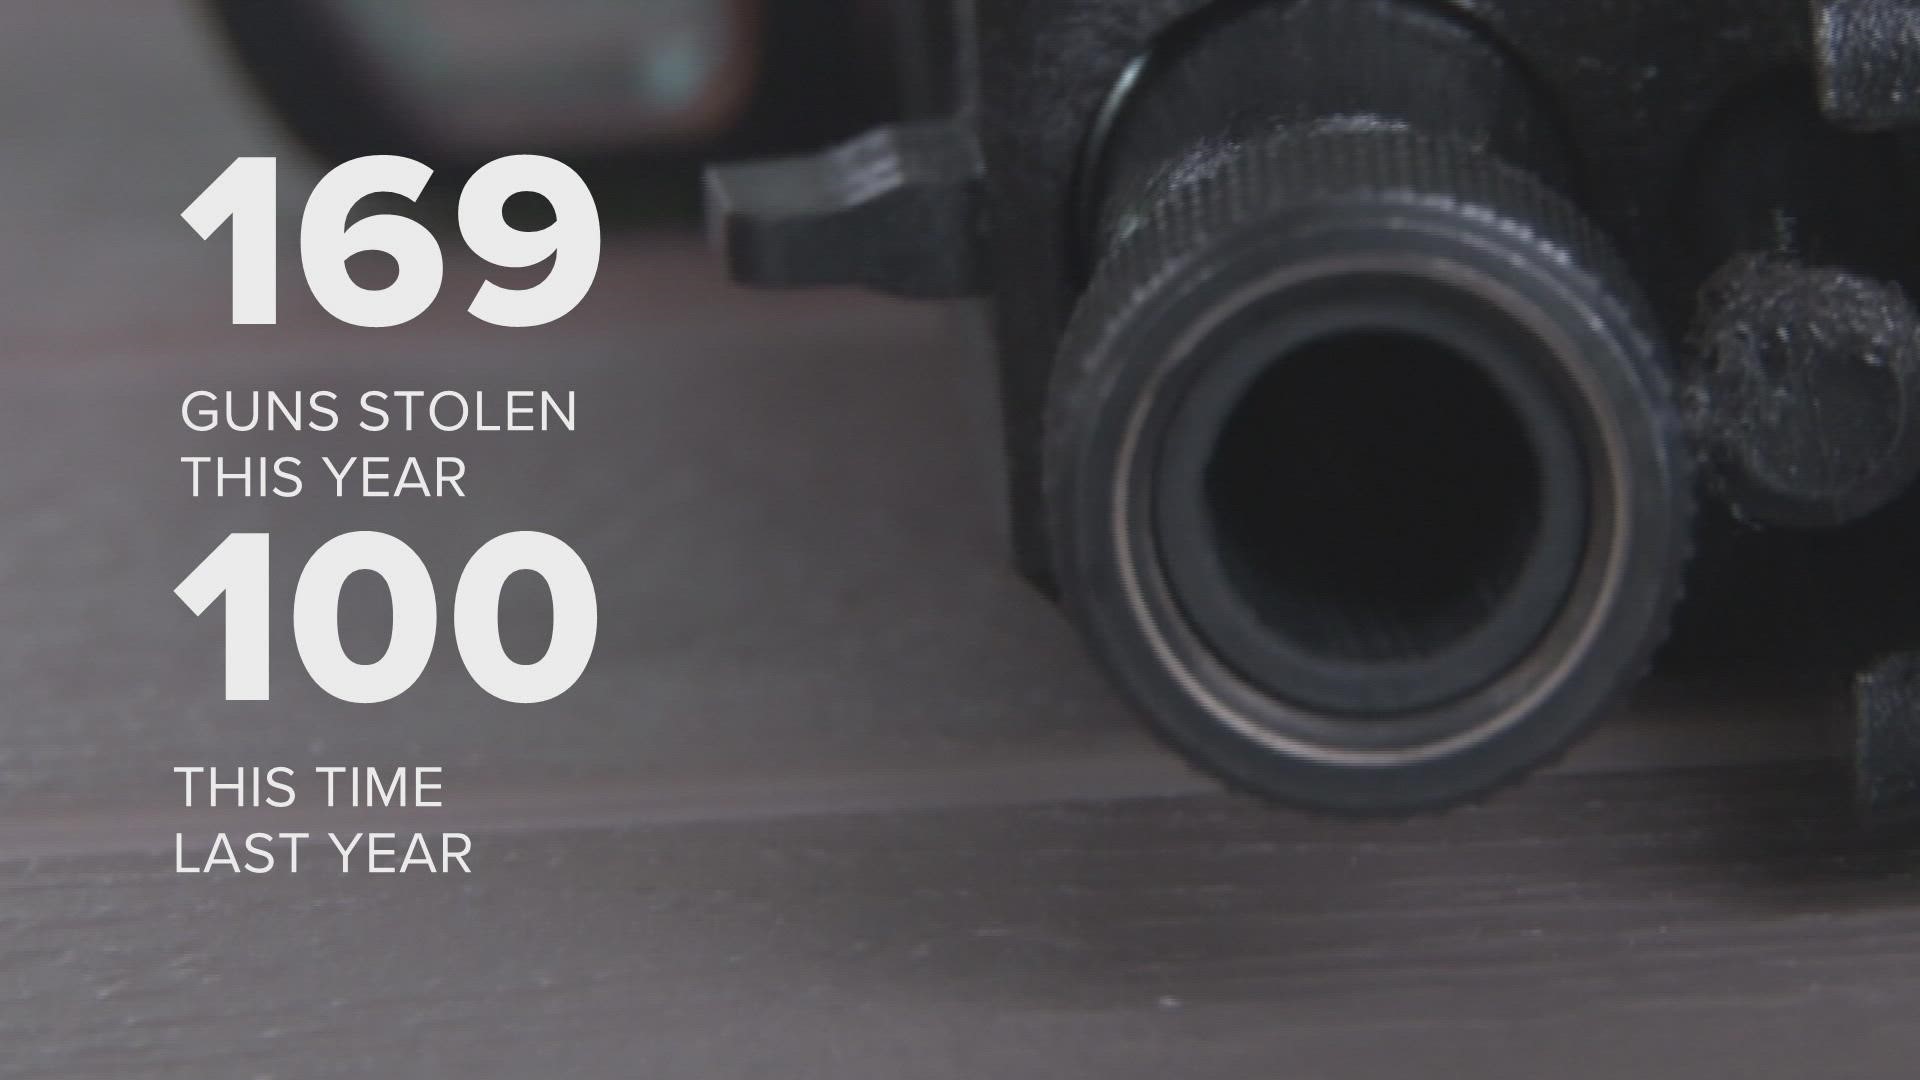 KPD reported 169 stolen guns on July 26, 2022. At that point last year, 100 guns were stolen in Knoxville